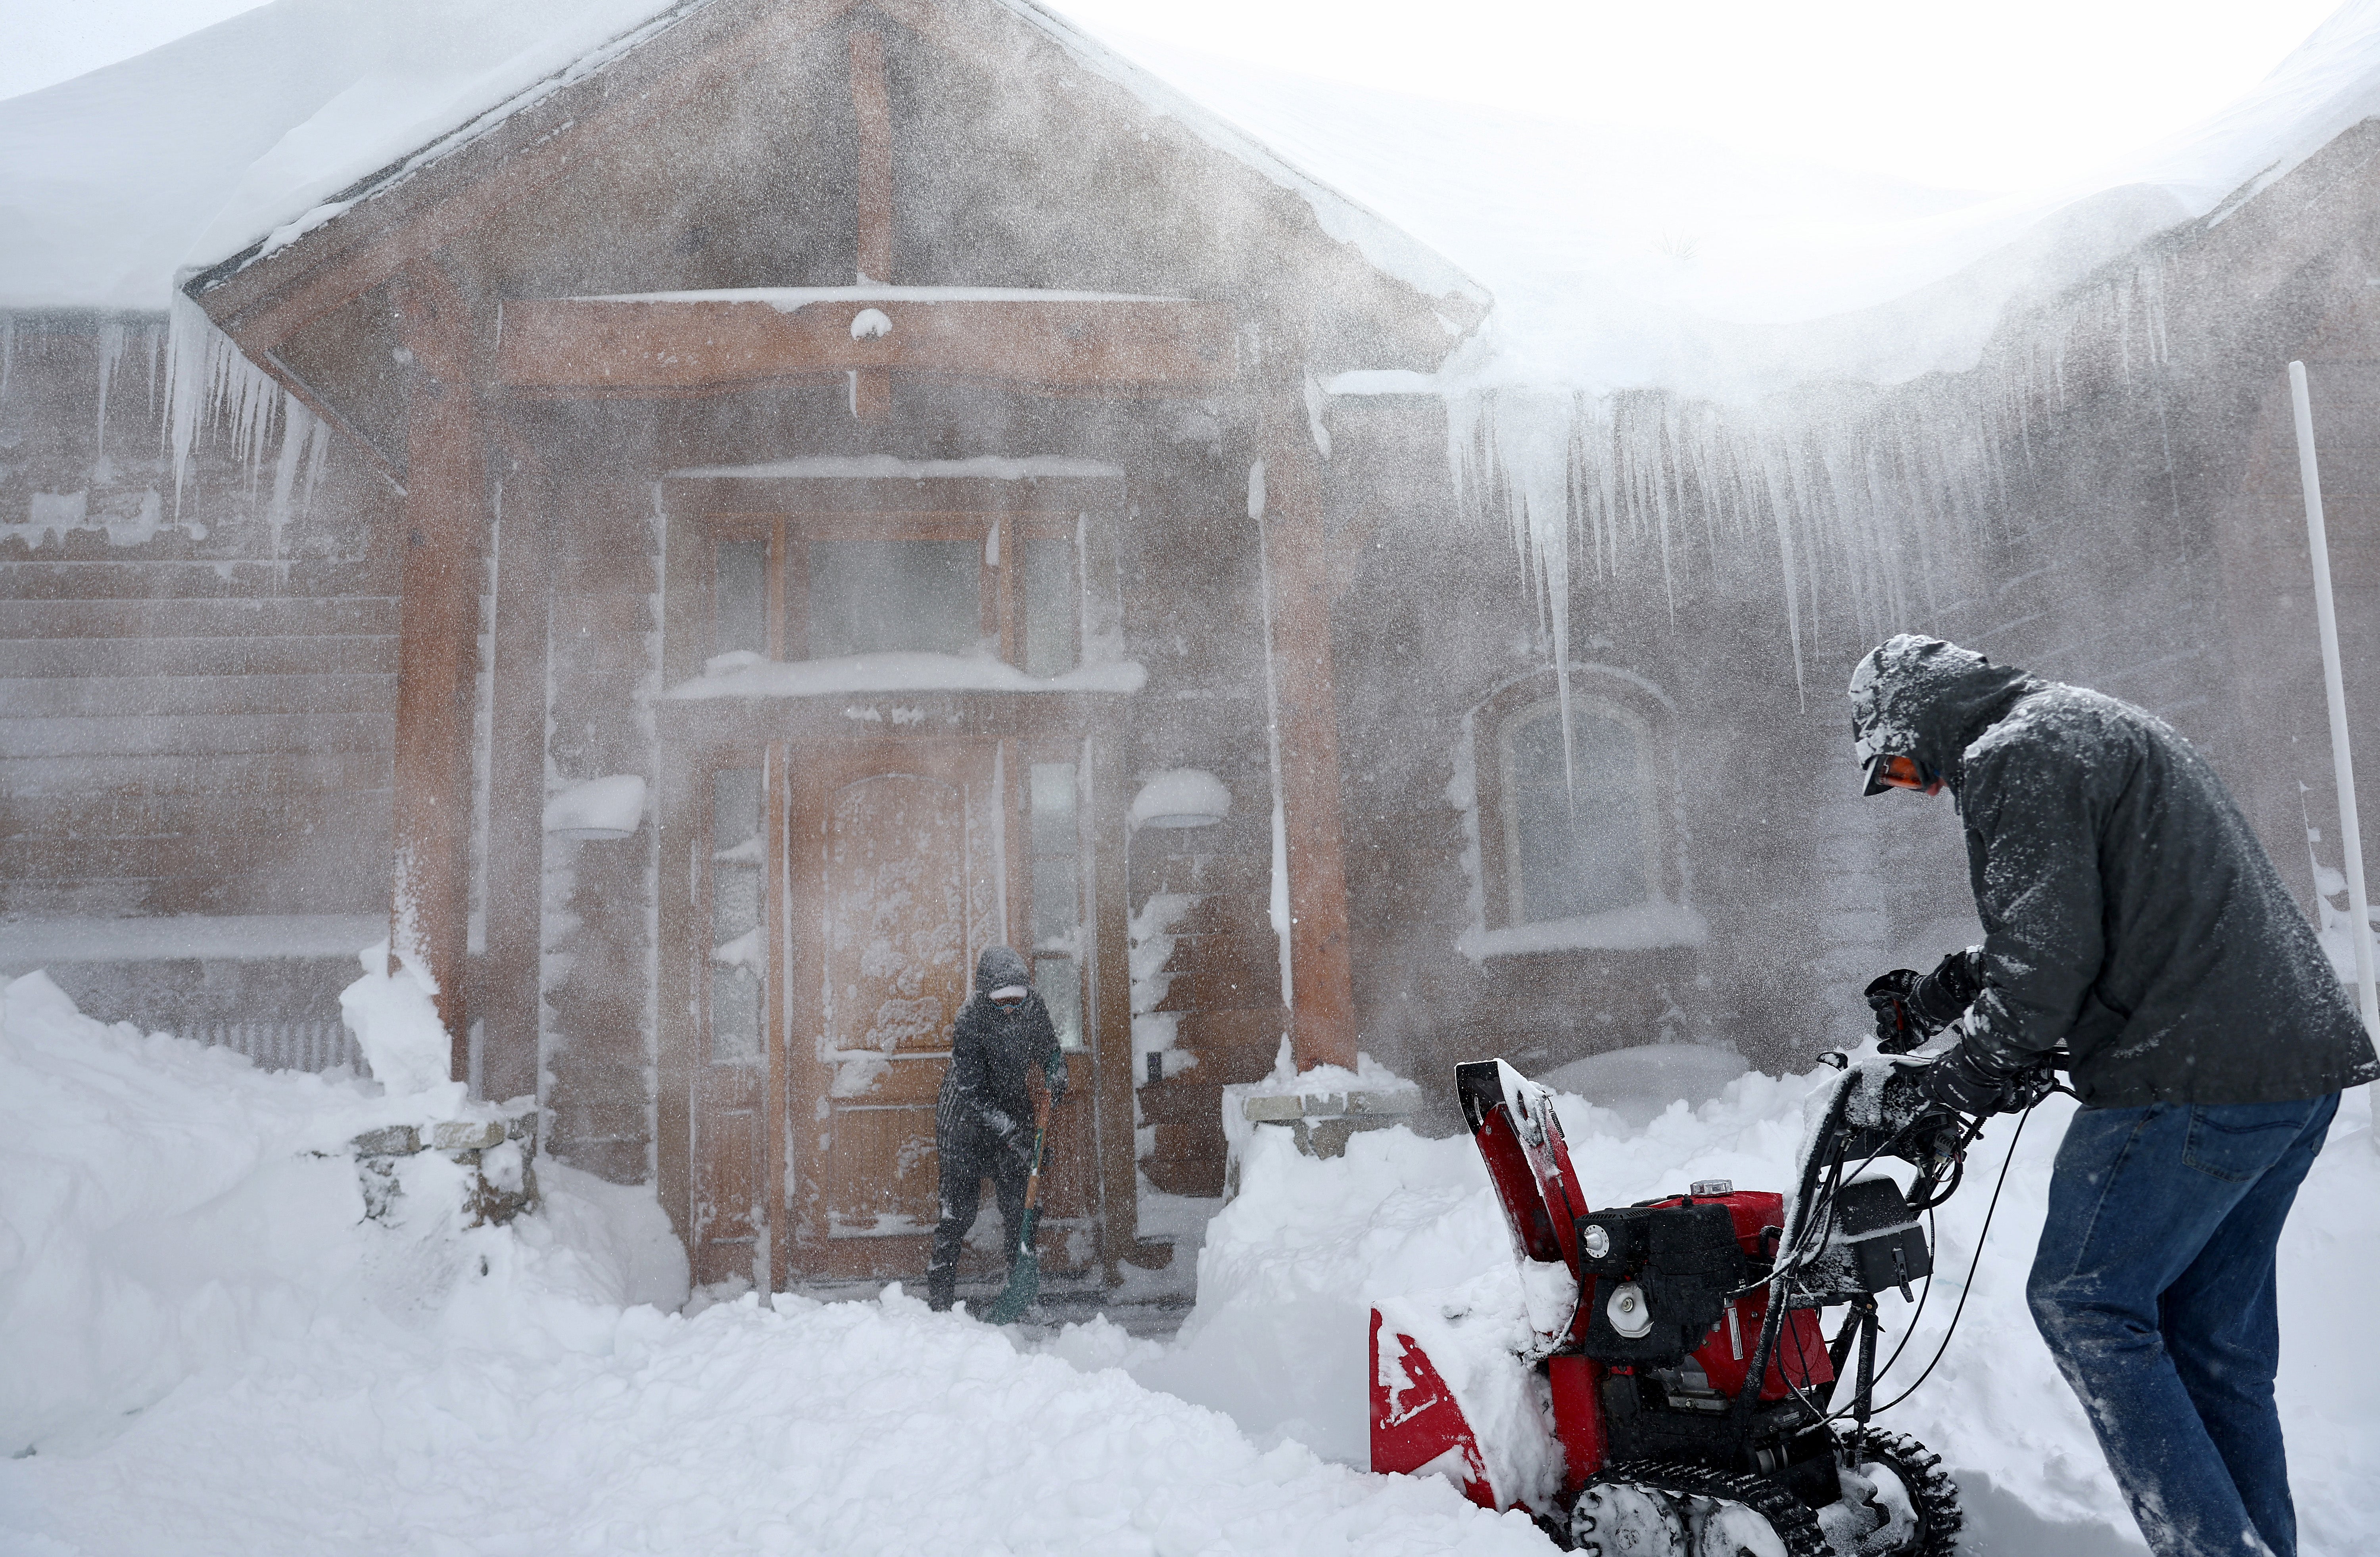 Residents clear out snow in front of their home on Donner Pass Road during a powerful multiple day winter storm in the Sierra Nevada mountains